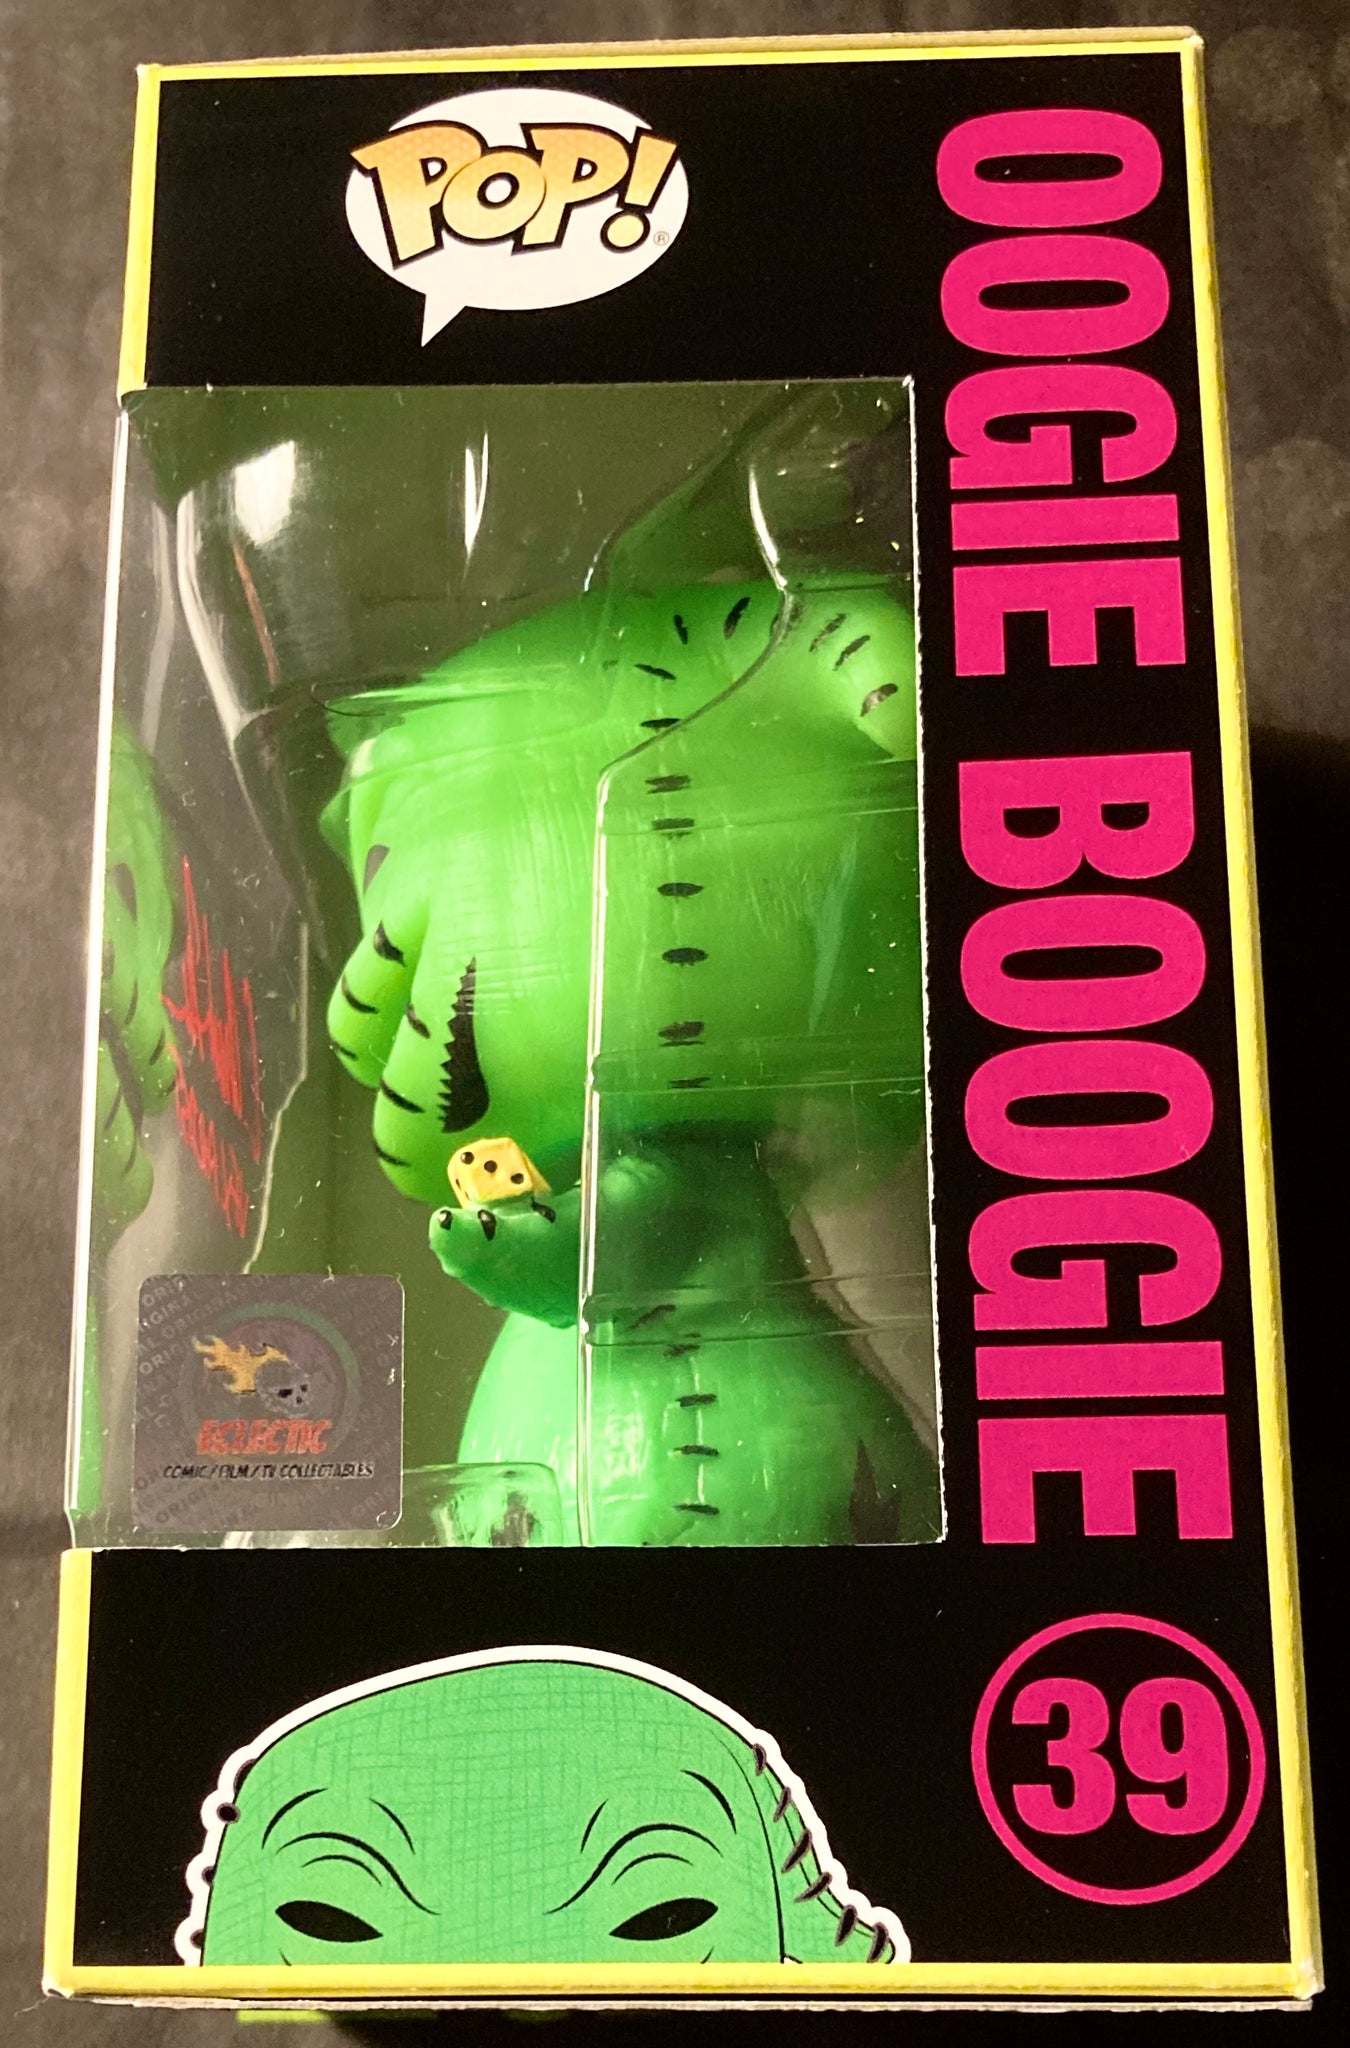 The Nightmare Before Christmas Oogie Boogie (Blacklight) C. Andrew Nelson Autographed 39 Funko POP! with Triple Layer Authenticity